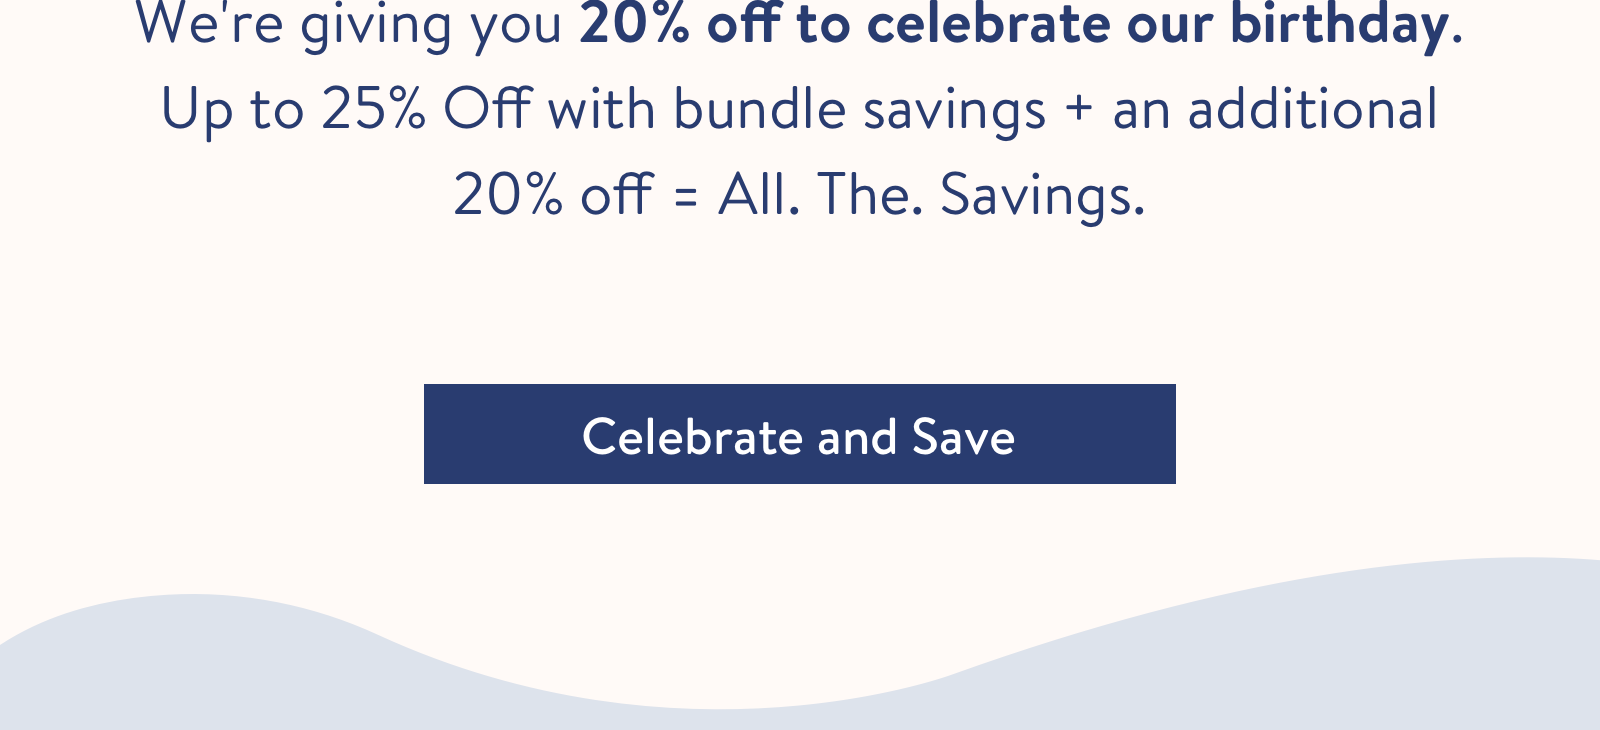 We''re giving you 20% off to celebrate our birthday. Up to 25% Off with bundle savings + an additional 20% off = All. The. Savings.